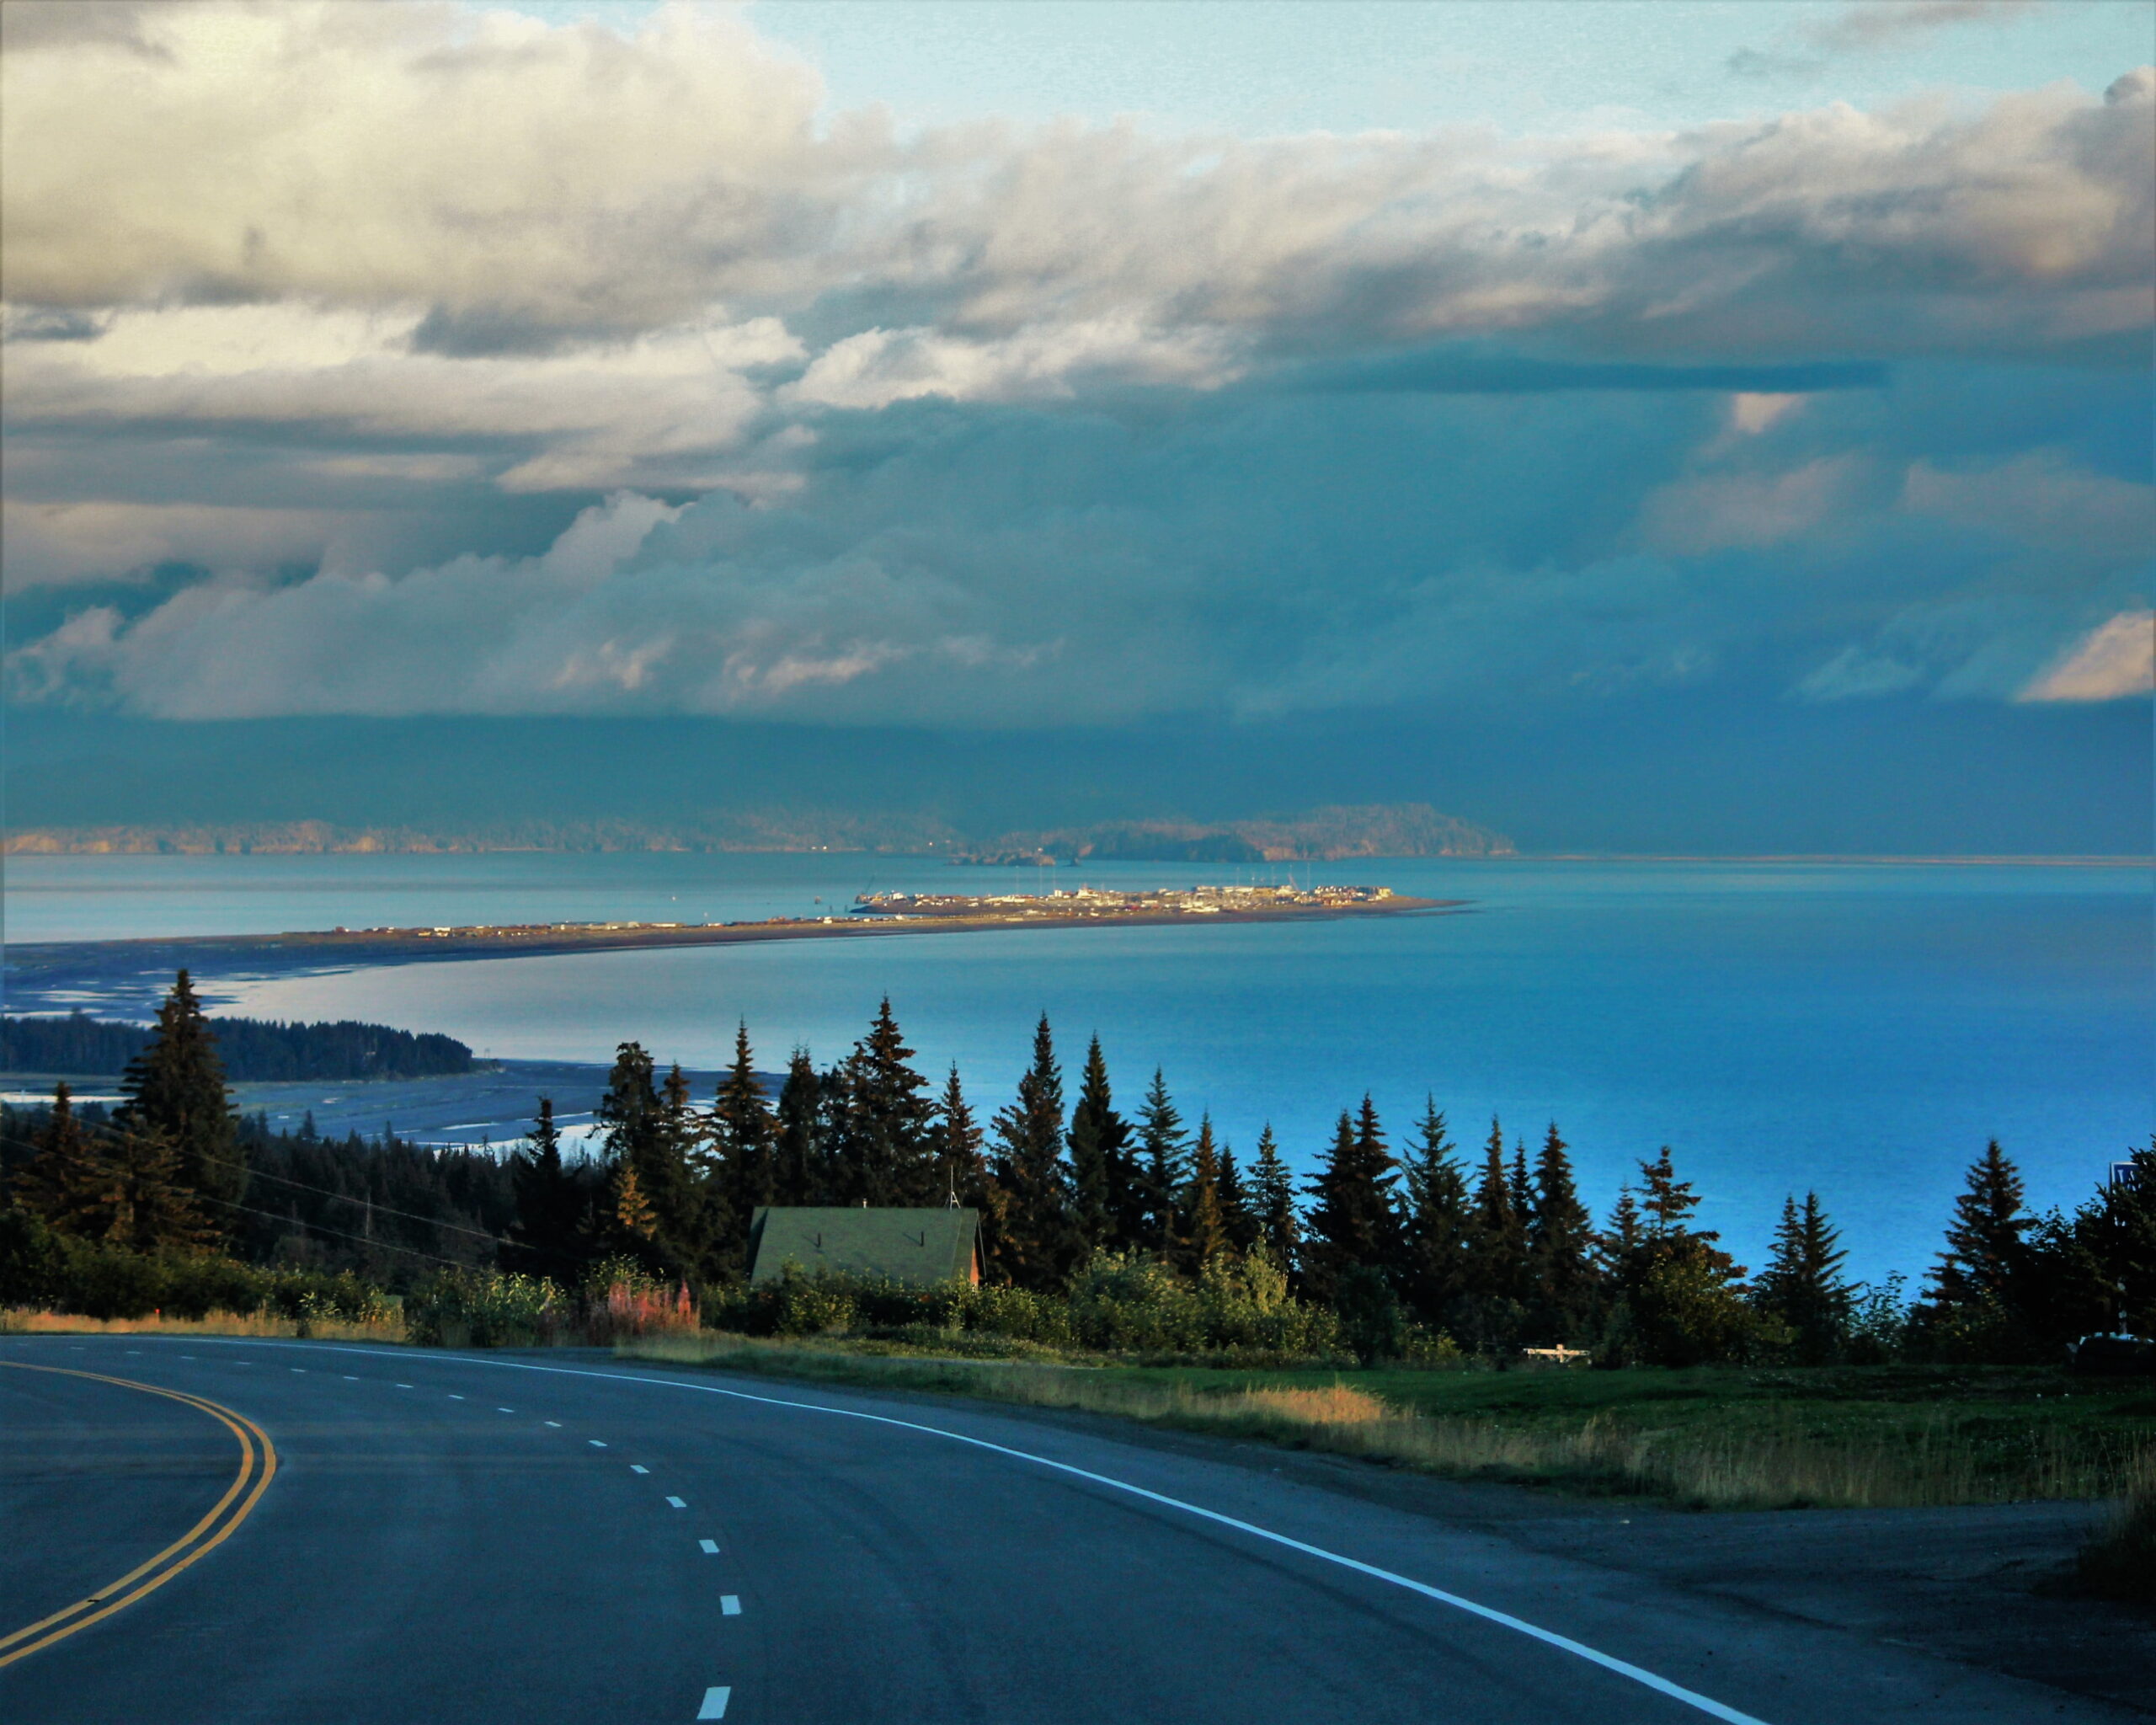 View of Baycrest Hill coming into Homer, AK.